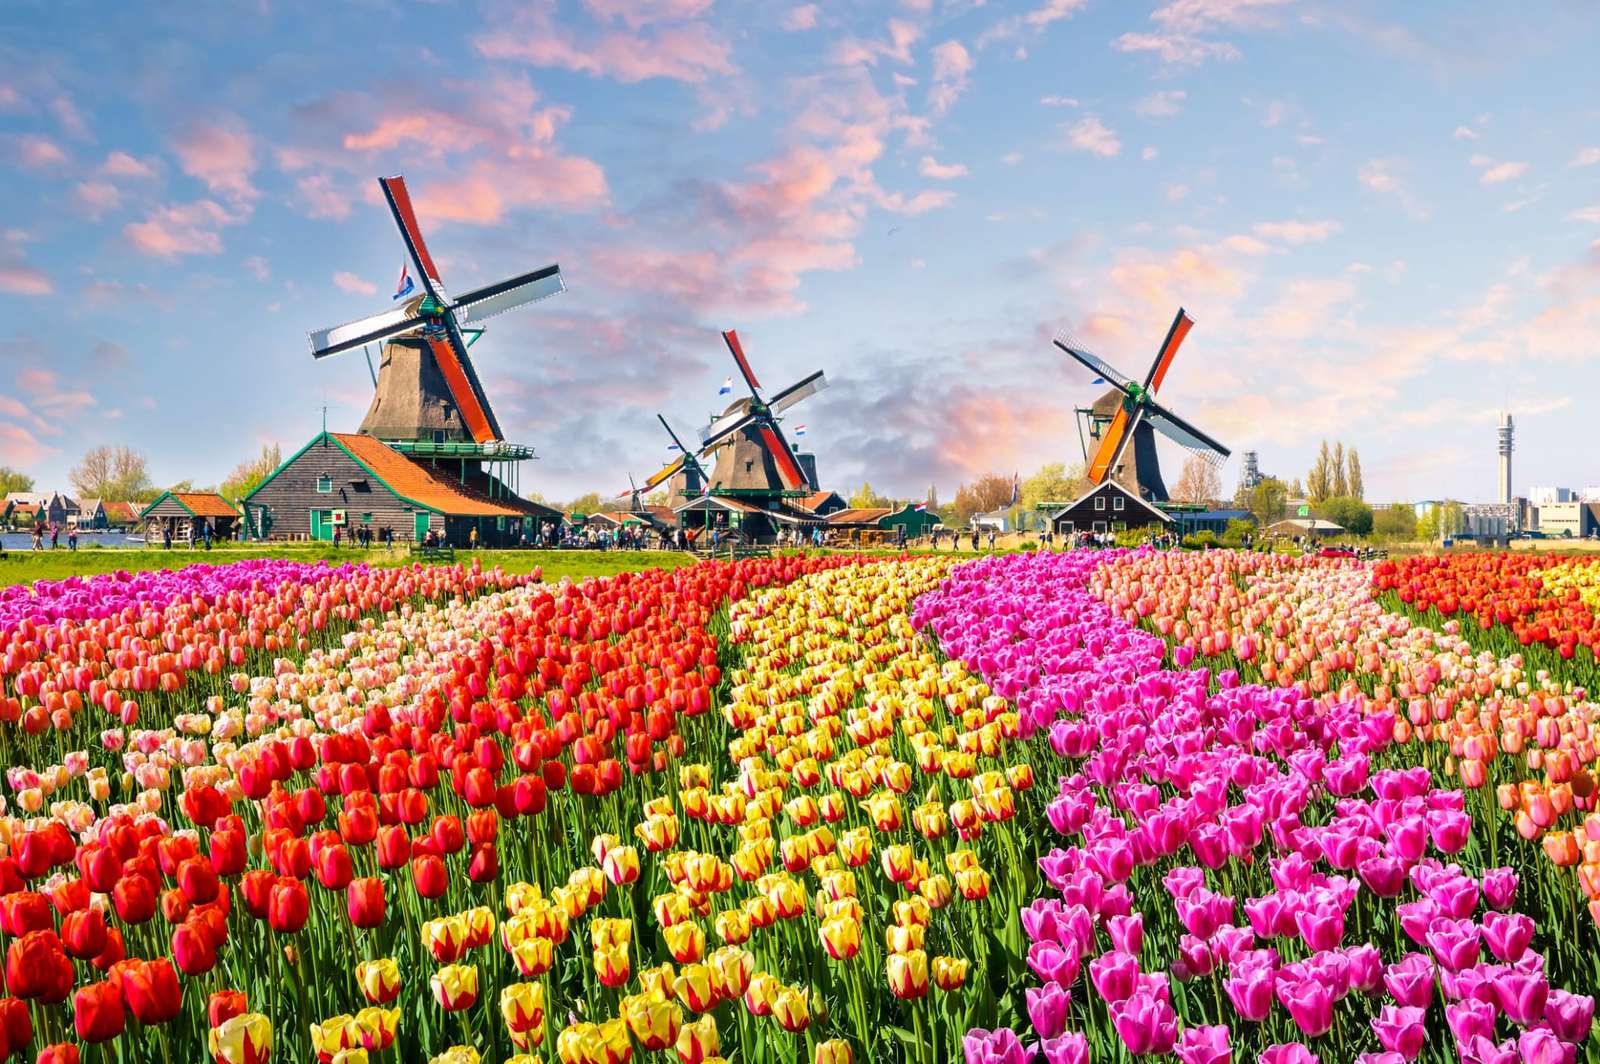 Tulipmills puzzle online from photo